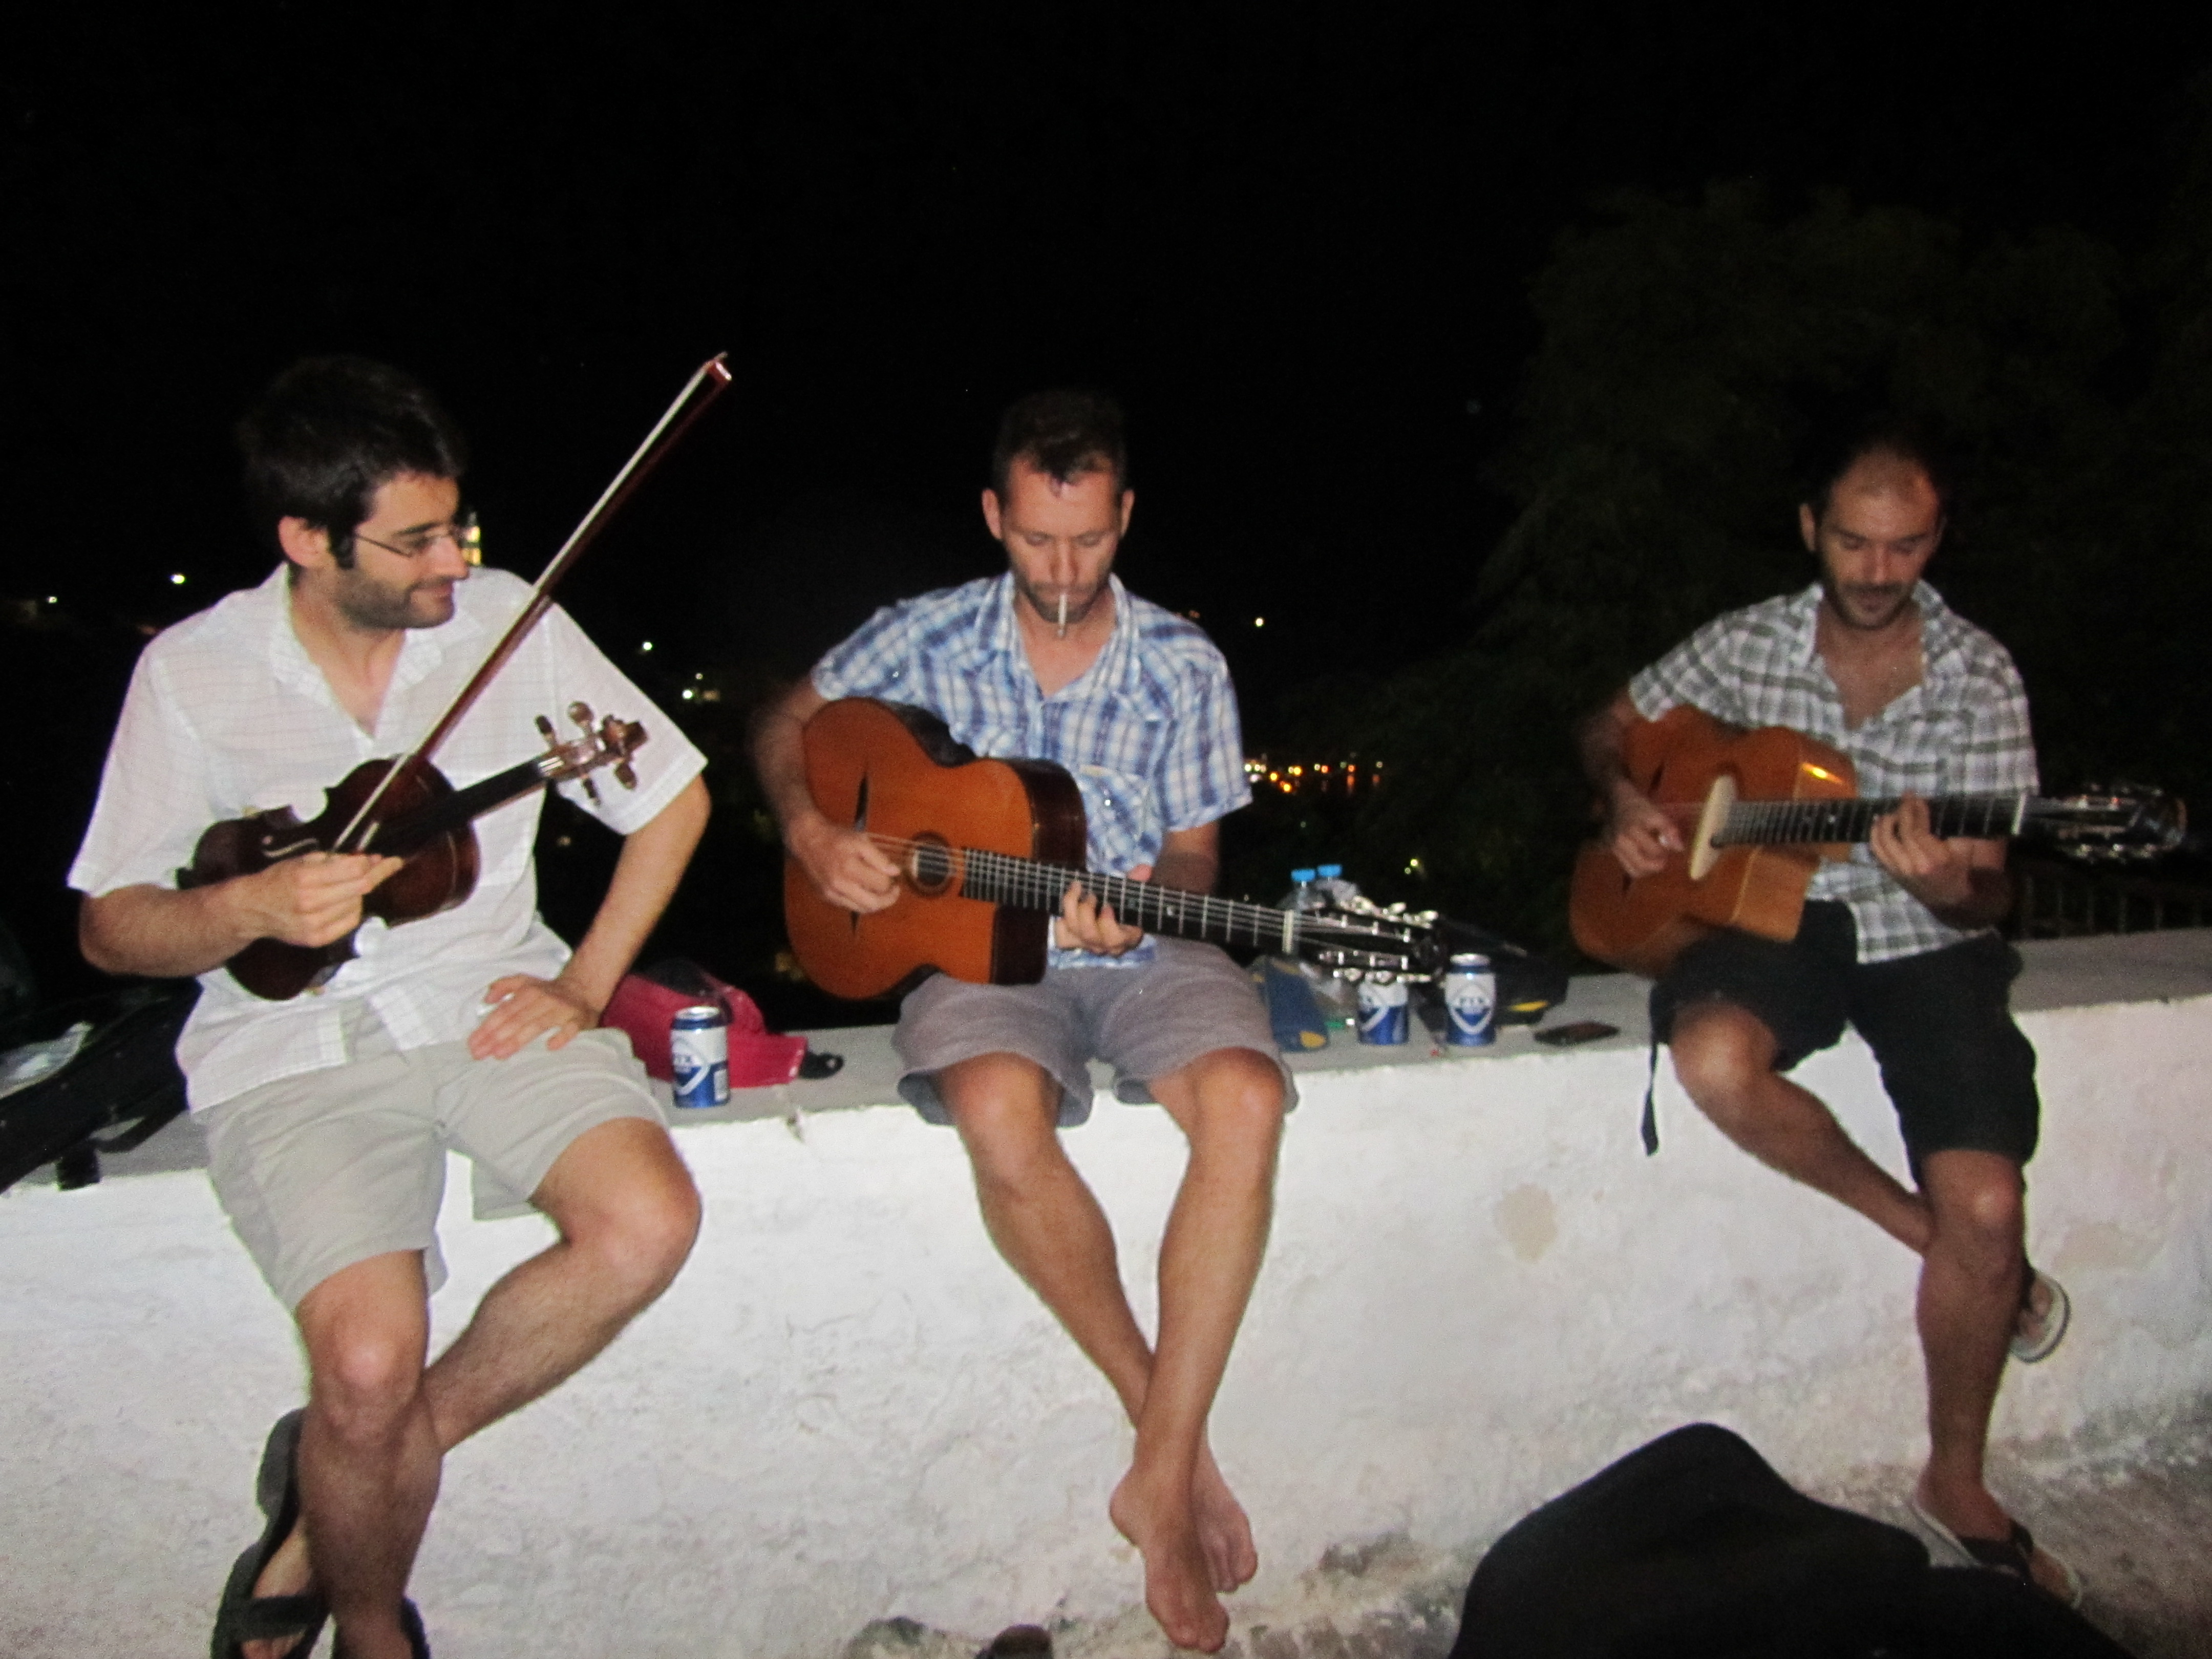 Busking on the island of Syros with good friends Manolis and George